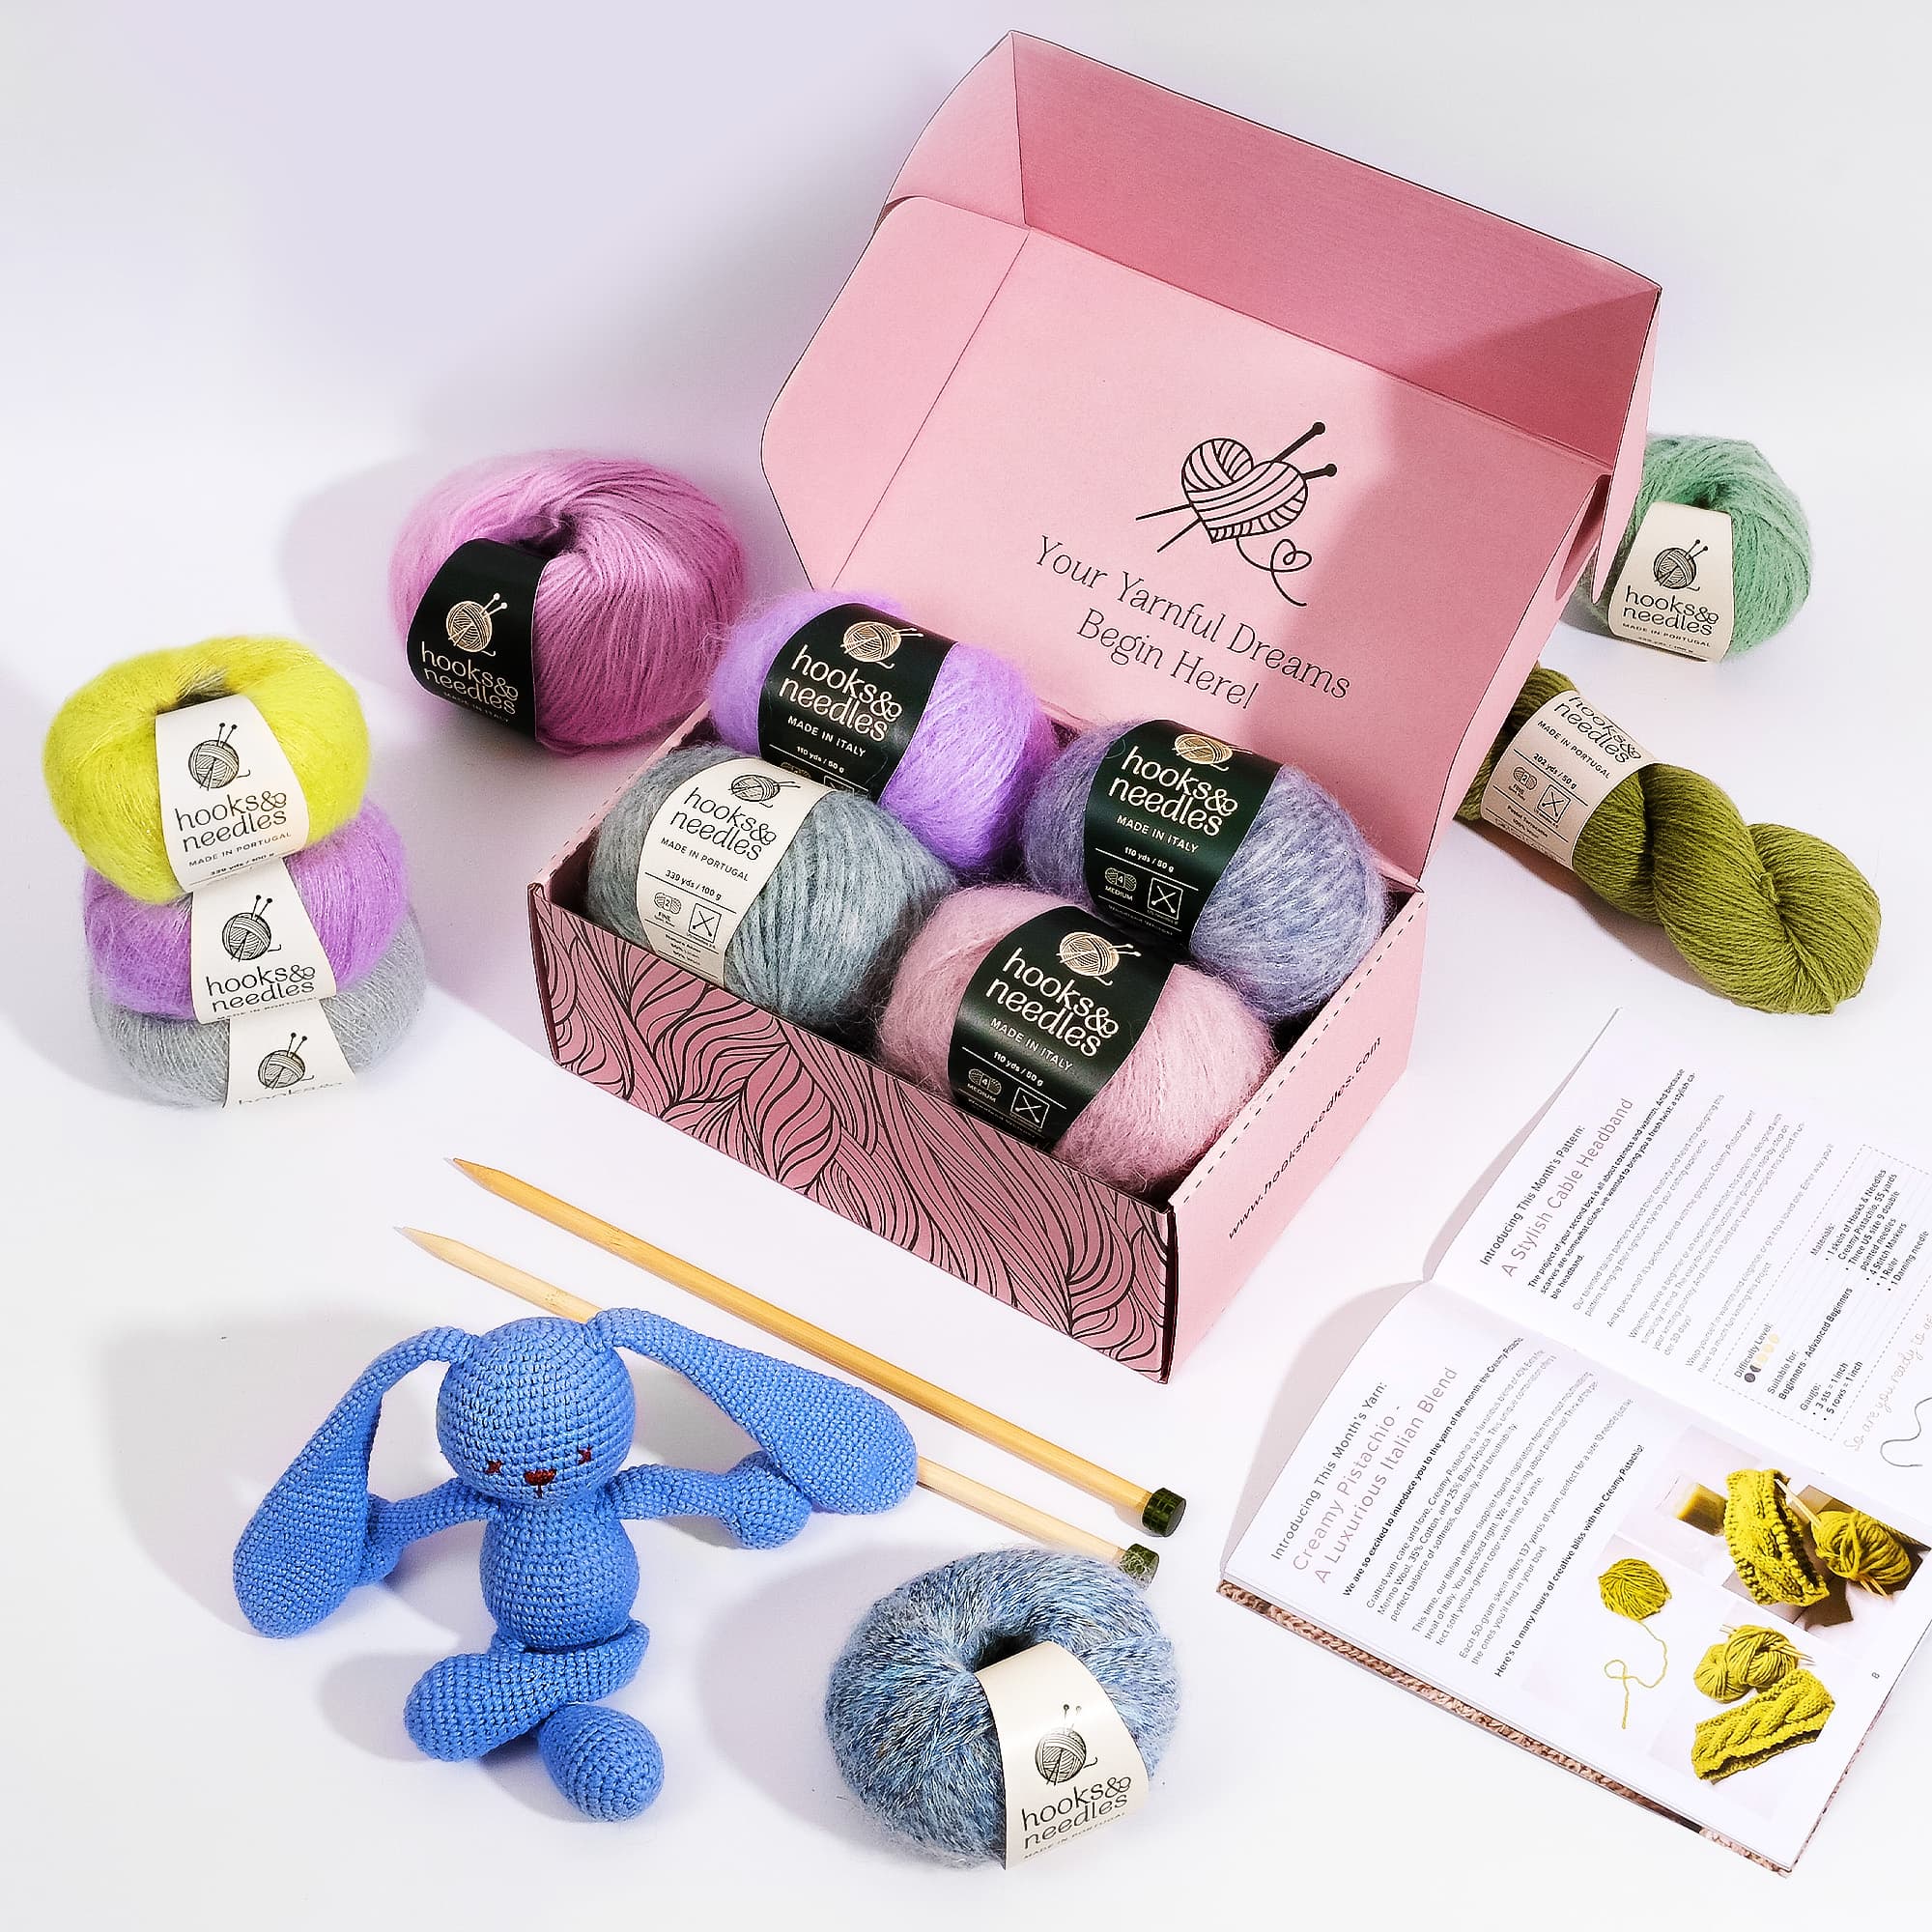 A Hooks & Needles Subscription Box featuring an assortment of colorful yarns, bamboo knitting needles, a pattern booklet, and a finished blue knitted bunny toy.